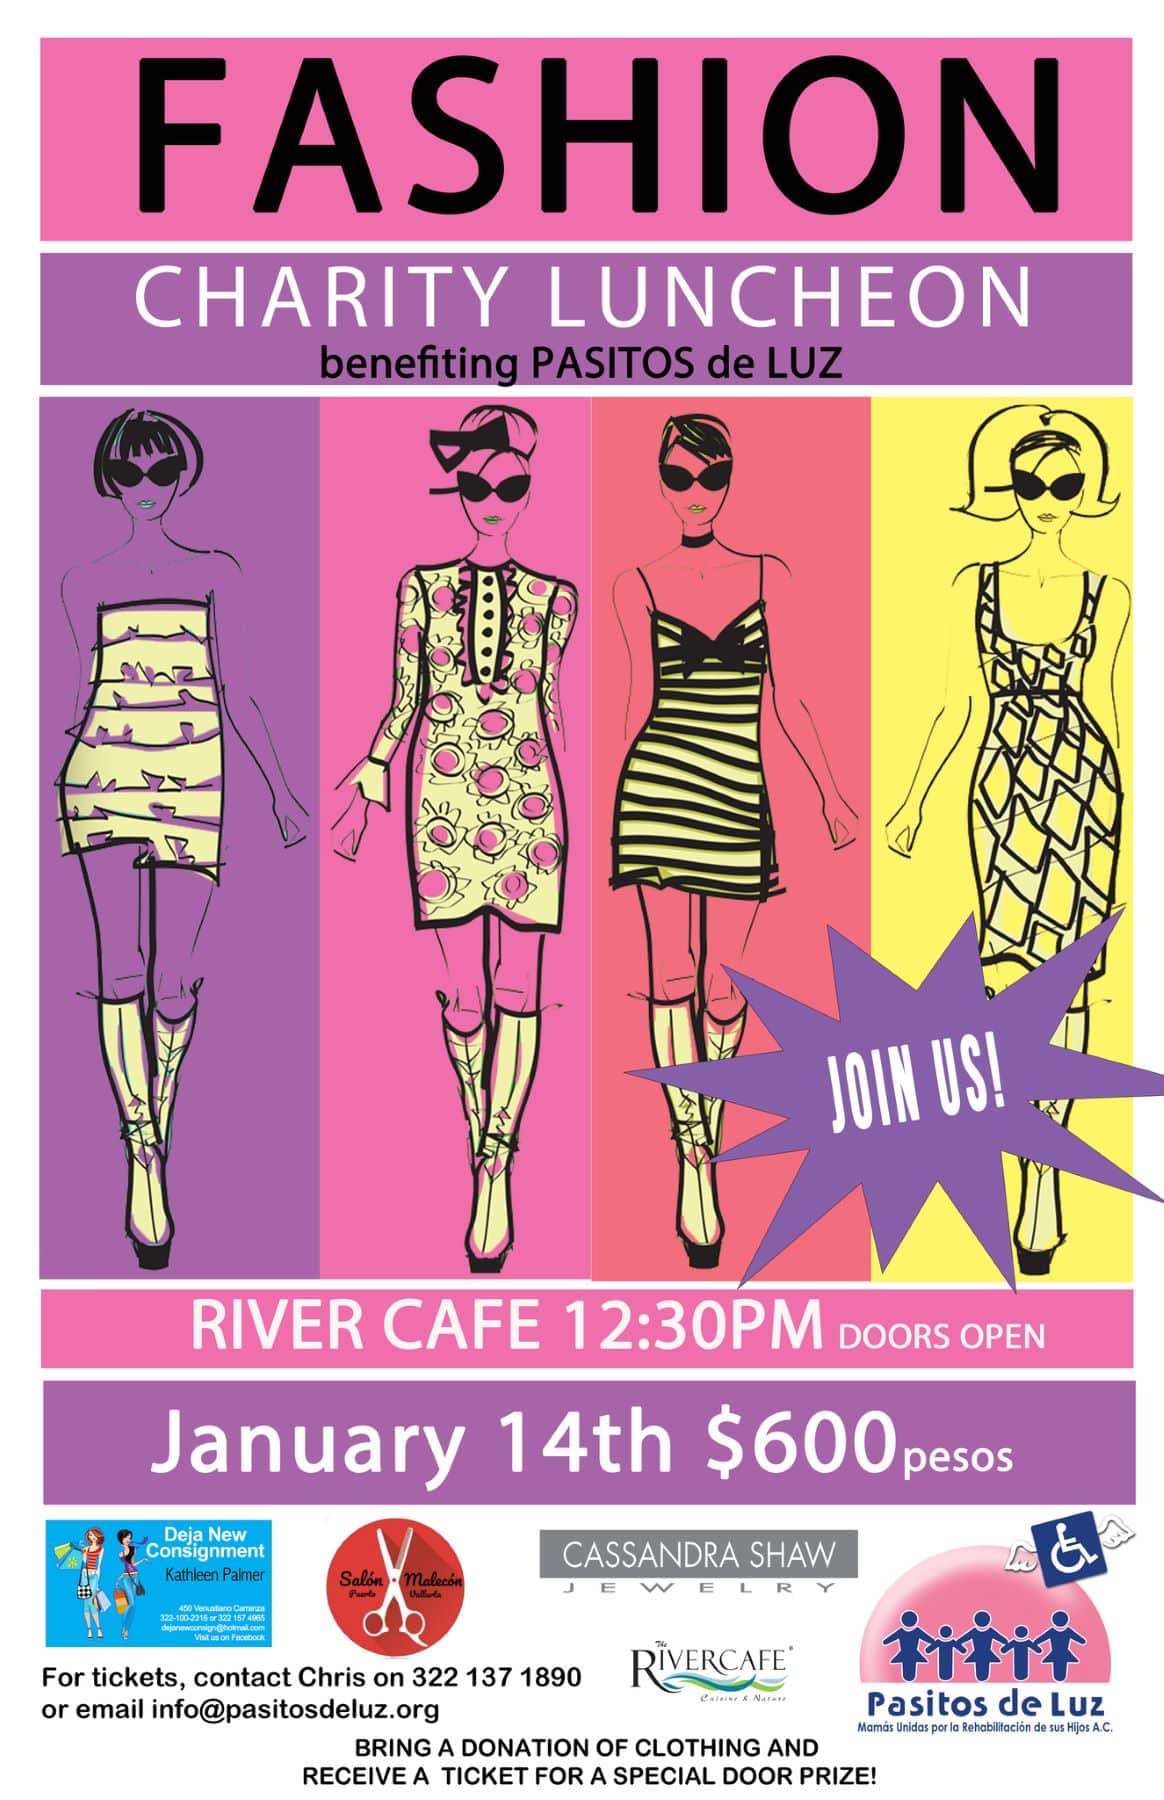 Fashion Charity Luncheon at River Café Saturday January 14th 2023 – SOLD OUT!